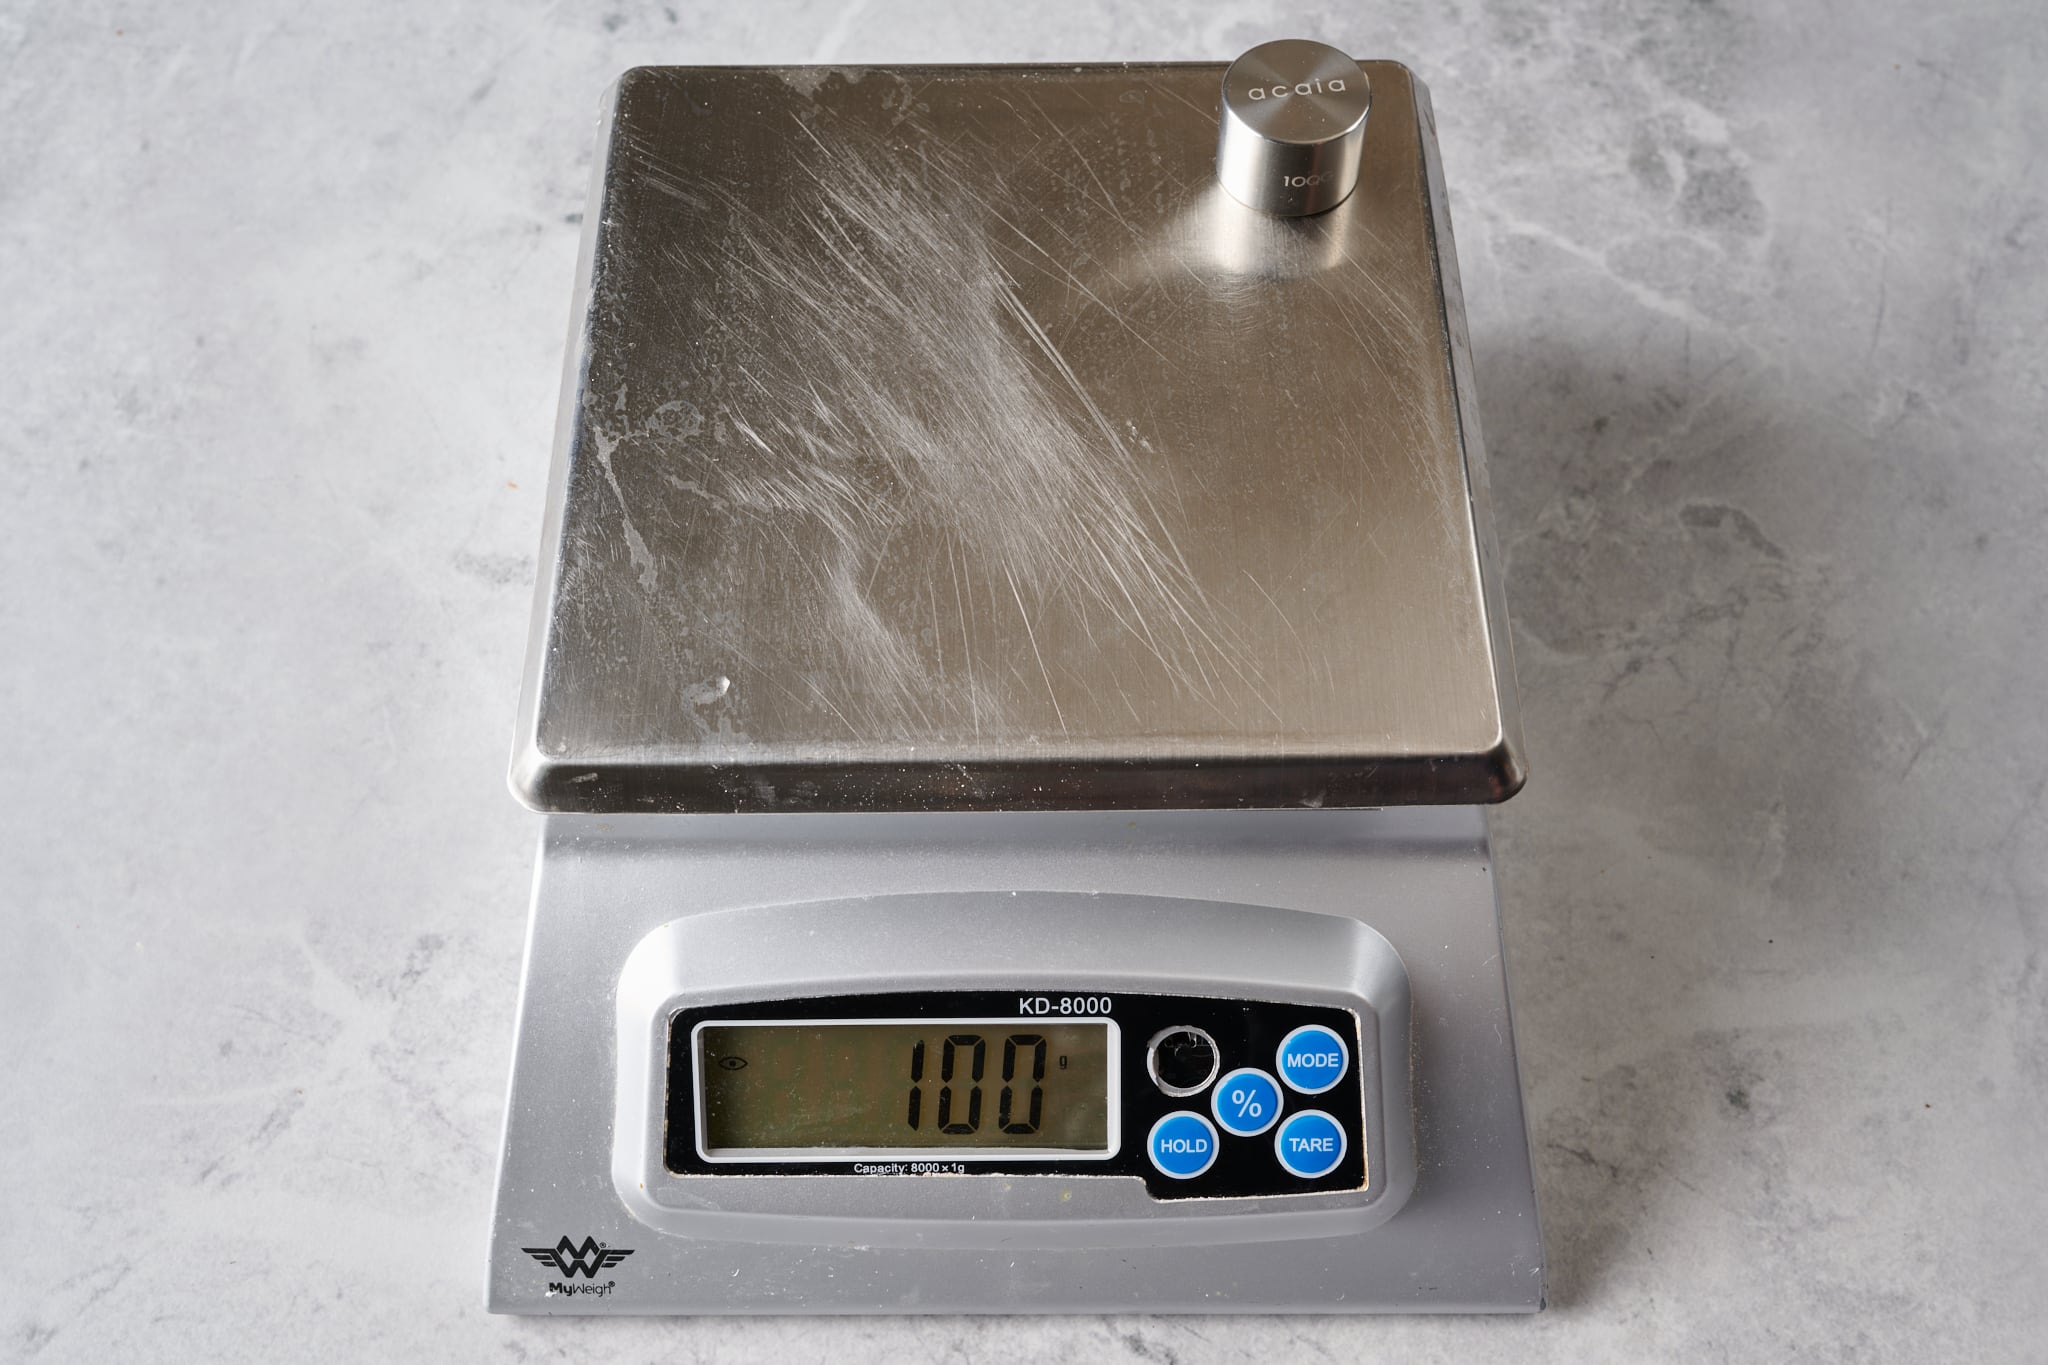 My Favorite Oxo Baking Scale